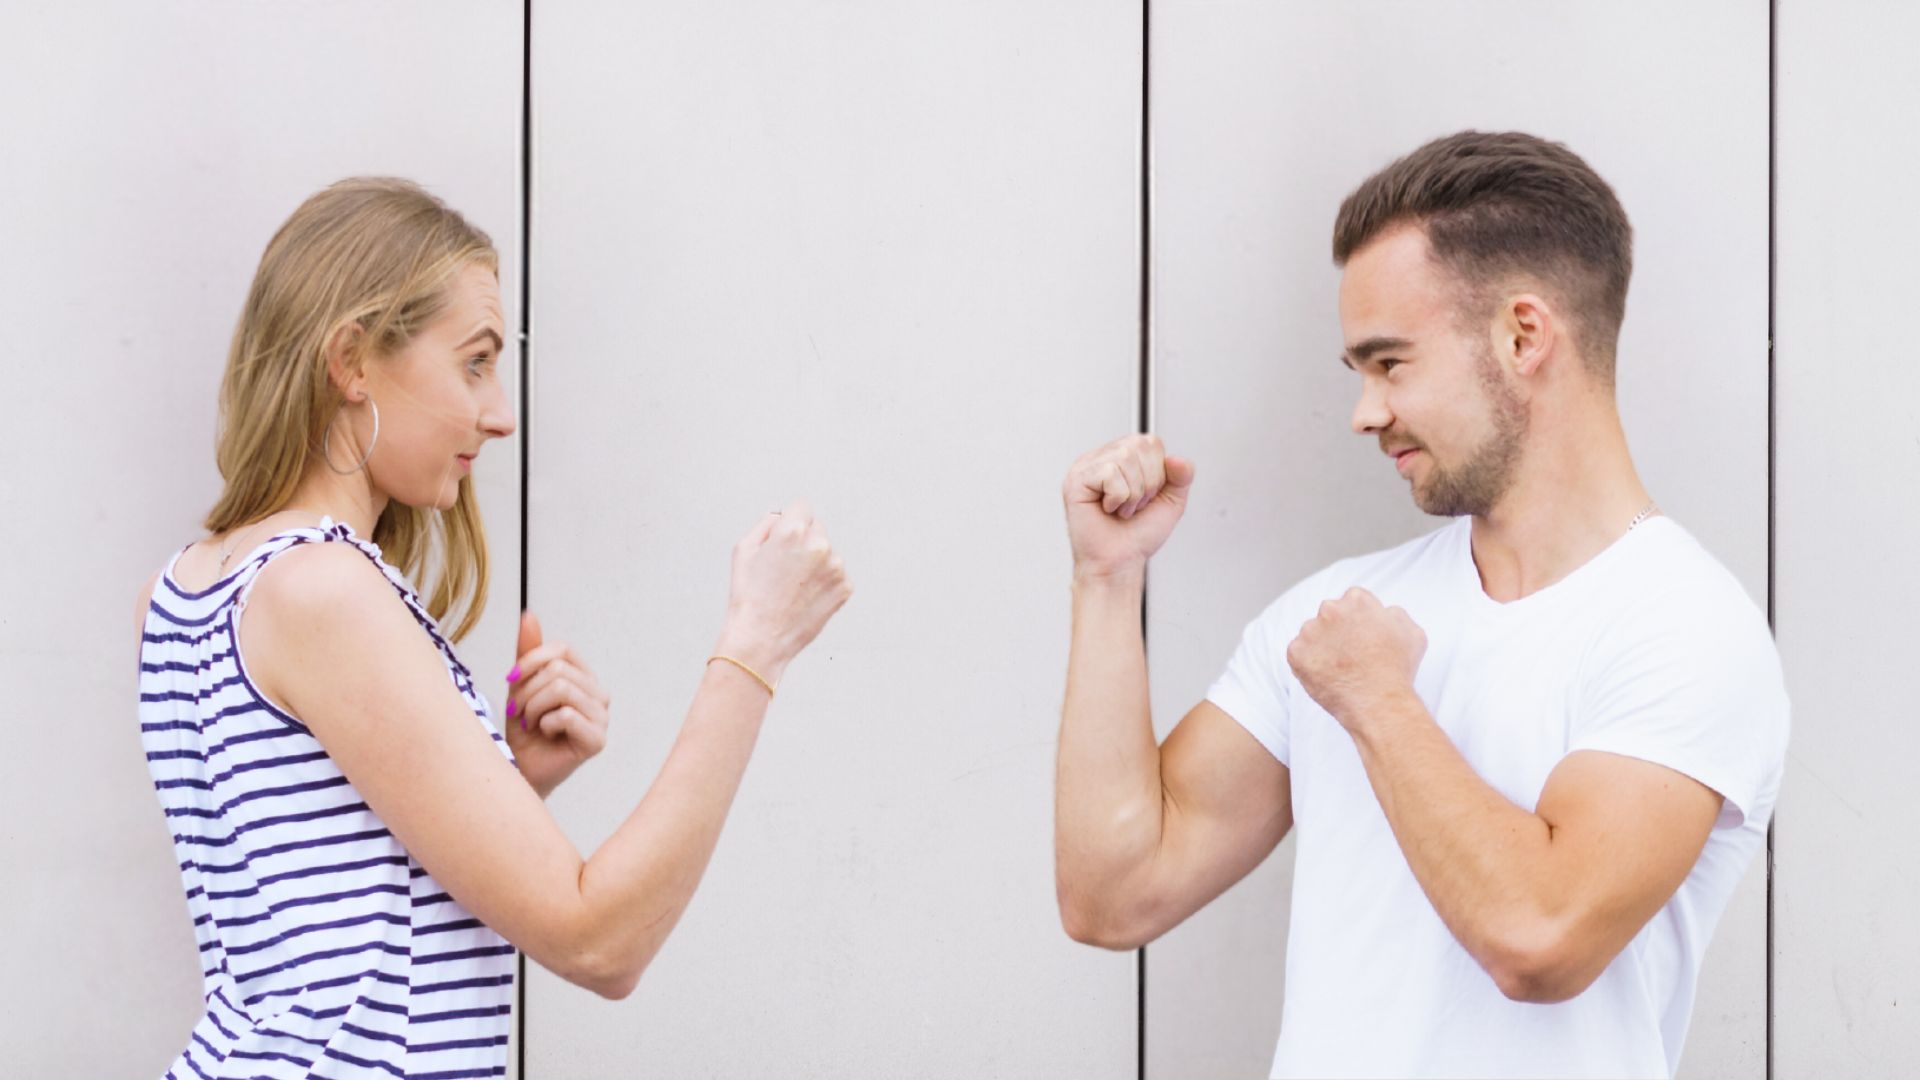 Man and woman face each other with their fists raised